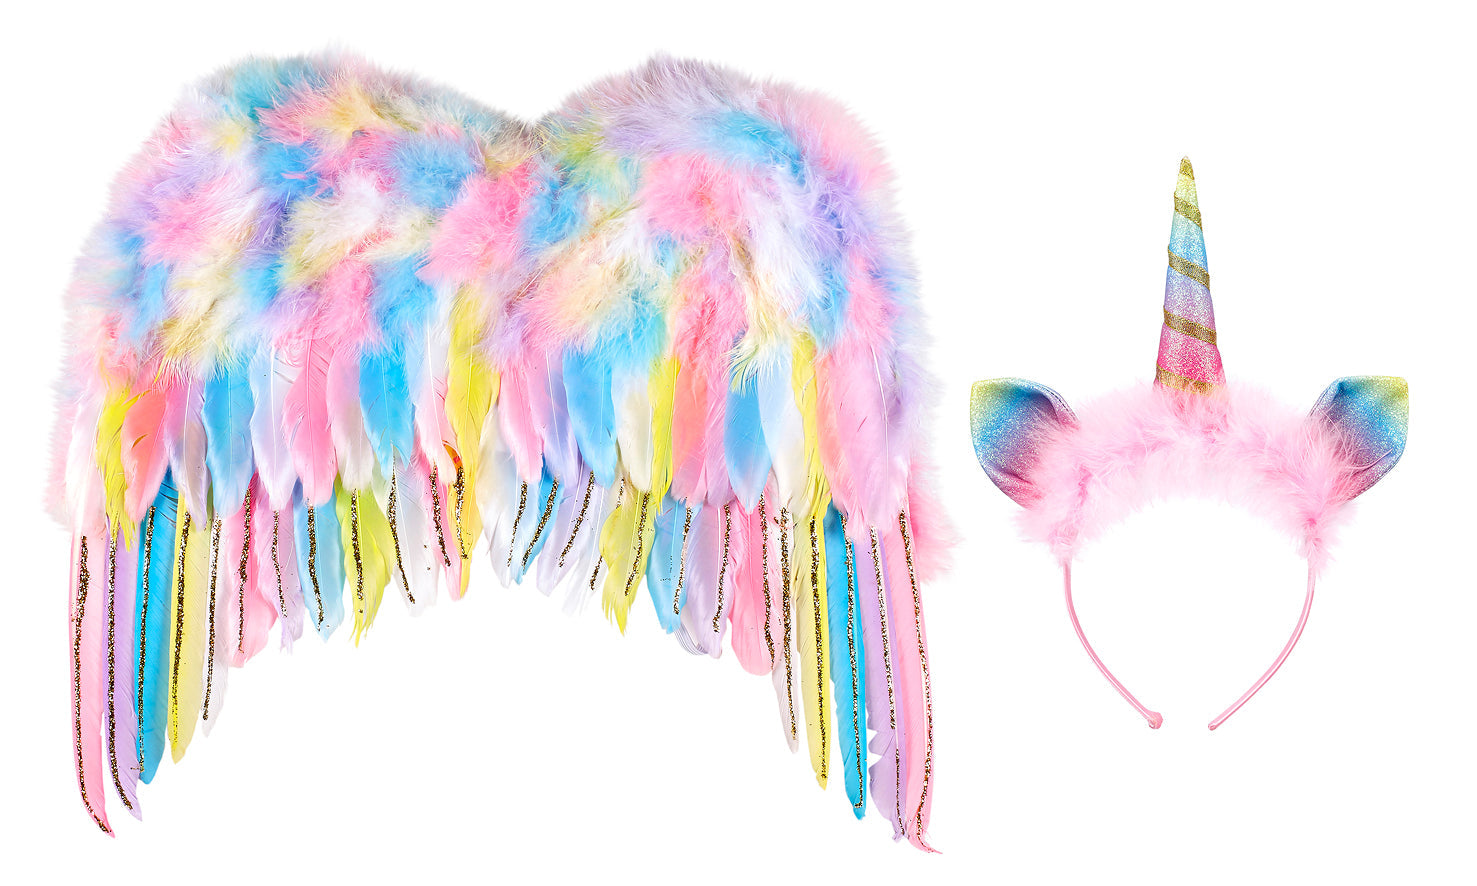 <p>Beautiful Souza costume depicting a unicorn. Included are two wings of feathers in the colors of the rainbow, where on the outside row, there are stripes of gold glitter. There is also a headband with ears and a horn in the same color as the wings. The headband also comes with rose feathery trim, giving it a beautiful look.</p>
<p>The Souza wings are worn with two wide elastics, ensuring a good and comfortable fit.</p>
<p><strong>Color</strong>: Multicolour<br><strong>Material</strong>: PU/ABS/dacron<br><strong>Size</strong>: - Headband: 13.38 inches  </p>
<ul>
<li>Wings: H: 15, W: 16.5 inches  </li>
<li>Elastics from wings: 14-19.70 inches<br><strong>Weight (lbs)</strong>: 0,242</li>
</ul>
